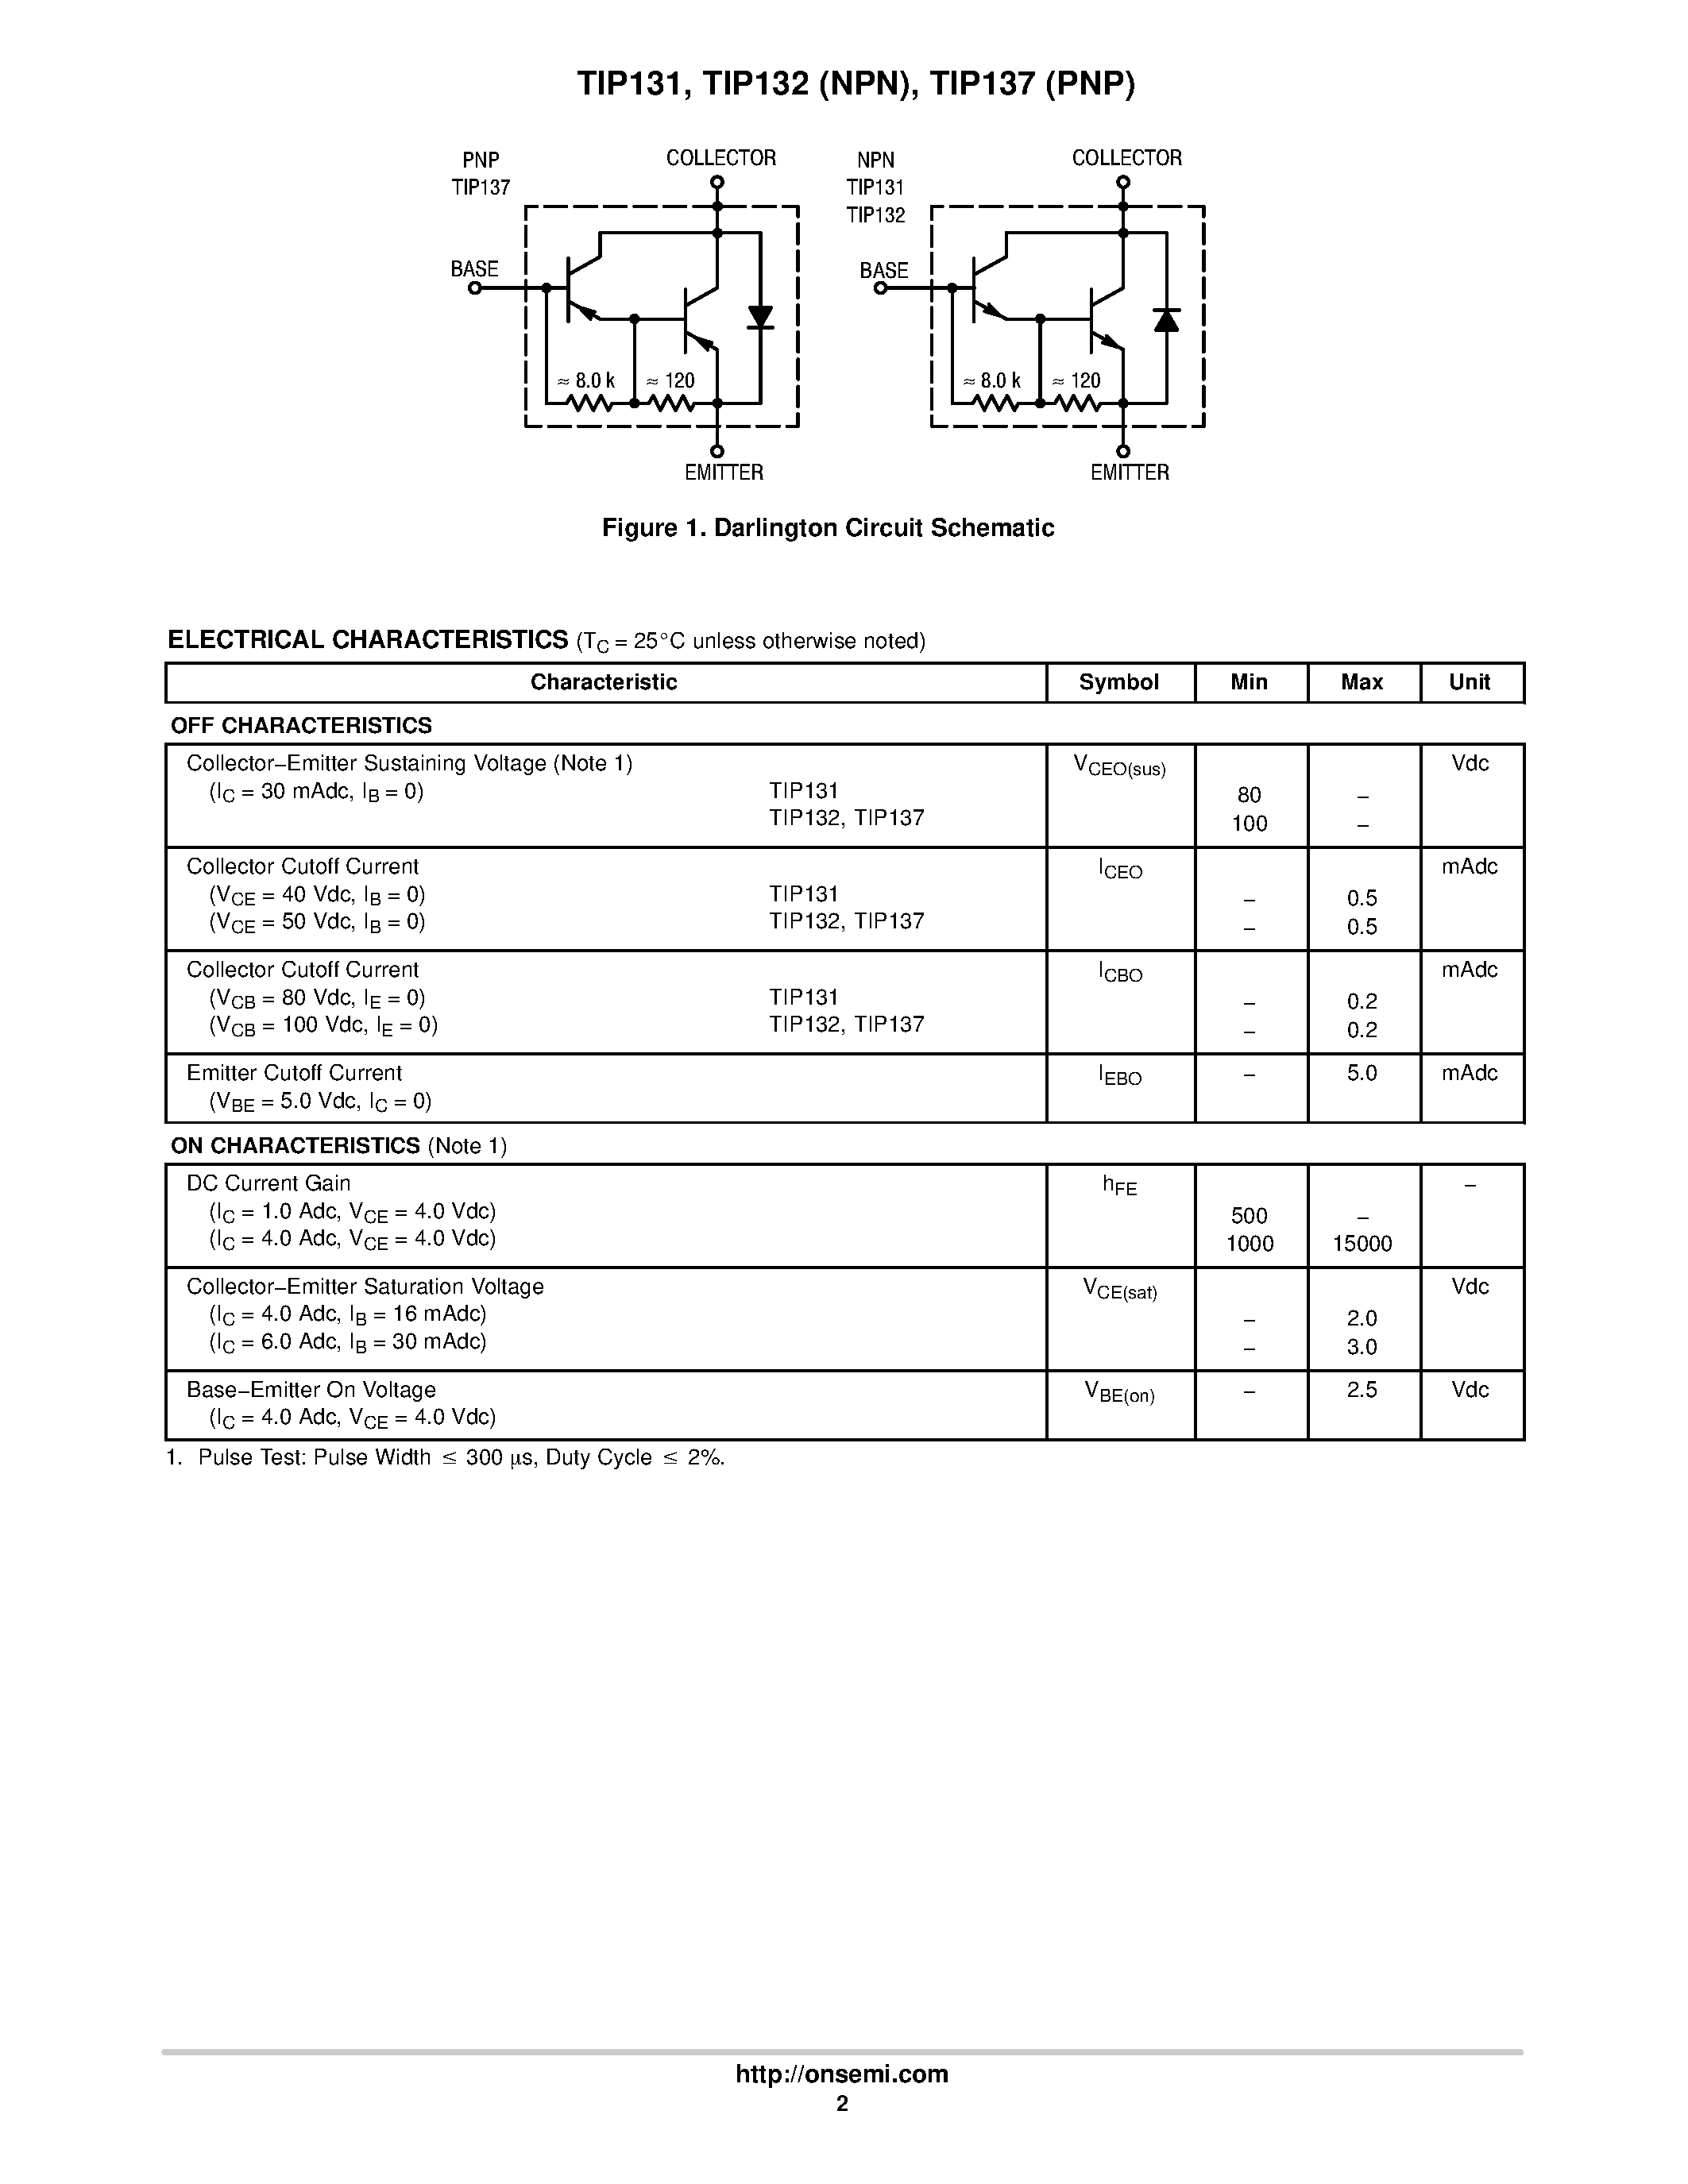 Datasheet TIP131 - (TIP131 - TIP137) Darlington Complementary Silicon Power Transistors page 2